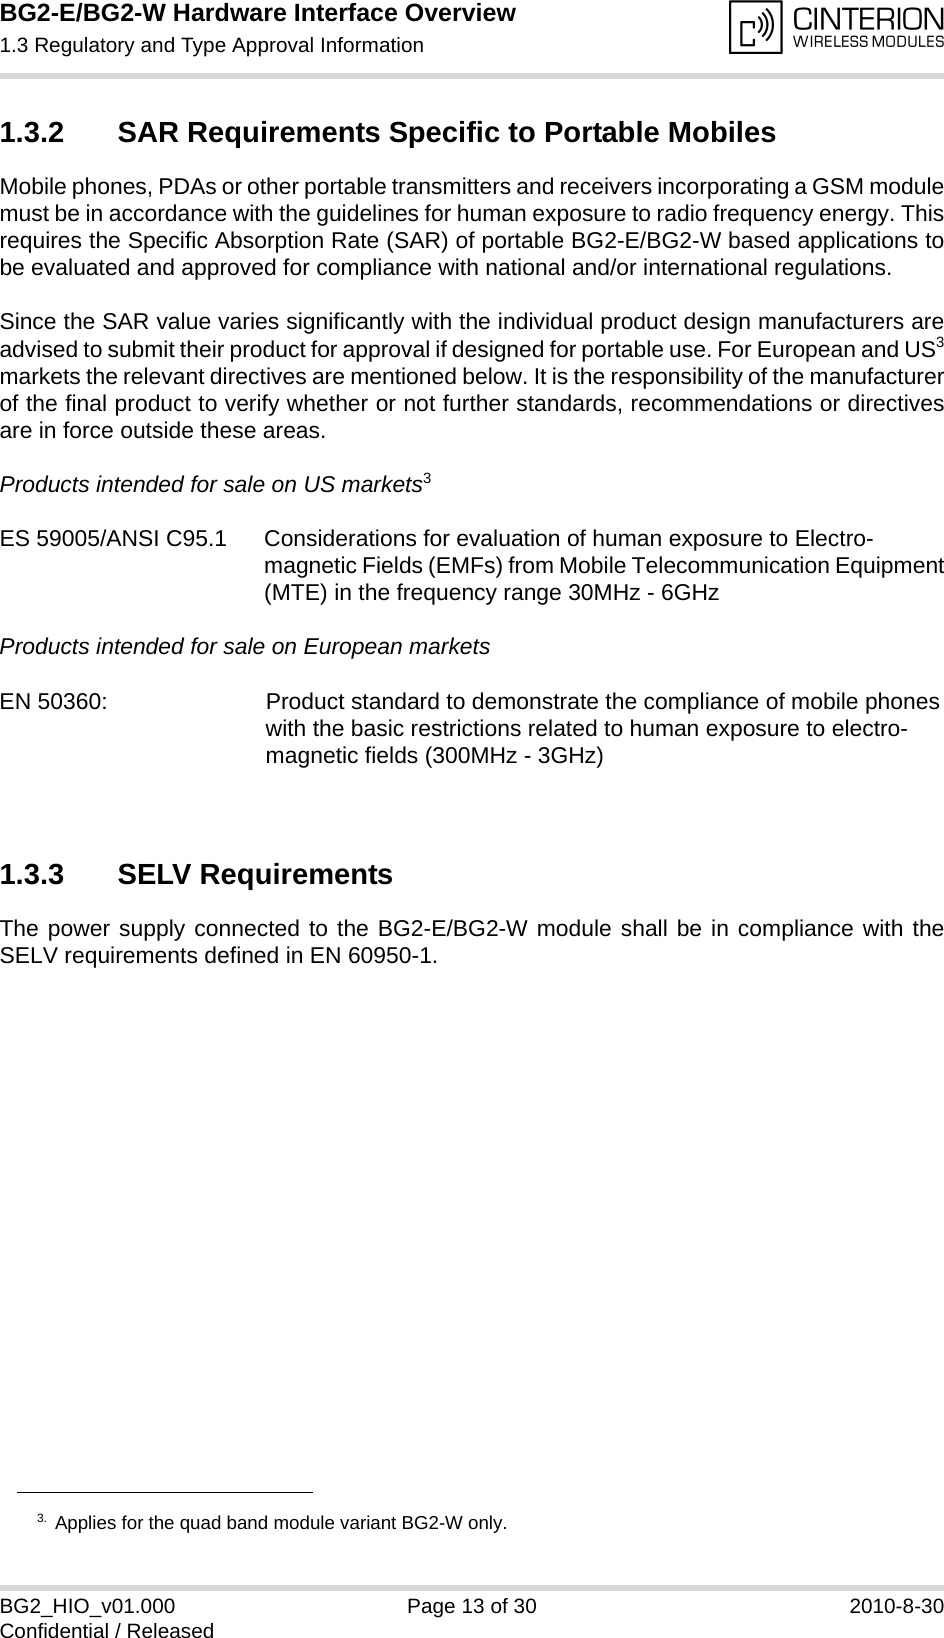 BG2-E/BG2-W Hardware Interface Overview1.3 Regulatory and Type Approval Information14BG2_HIO_v01.000 Page 13 of 30 2010-8-30Confidential / Released1.3.2 SAR Requirements Specific to Portable MobilesMobile phones, PDAs or other portable transmitters and receivers incorporating a GSM modulemust be in accordance with the guidelines for human exposure to radio frequency energy. Thisrequires the Specific Absorption Rate (SAR) of portable BG2-E/BG2-W based applications tobe evaluated and approved for compliance with national and/or international regulations. Since the SAR value varies significantly with the individual product design manufacturers areadvised to submit their product for approval if designed for portable use. For European and US3markets the relevant directives are mentioned below. It is the responsibility of the manufacturerof the final product to verify whether or not further standards, recommendations or directivesare in force outside these areas. Products intended for sale on US markets3ES 59005/ANSI C95.1 Considerations for evaluation of human exposure to Electro-magnetic Fields (EMFs) from Mobile Telecommunication Equipment(MTE) in the frequency range 30MHz - 6GHz Products intended for sale on European markets EN 50360:  Product standard to demonstrate the compliance of mobile phoneswith the basic restrictions related to human exposure to electro-magnetic fields (300MHz - 3GHz)1.3.3 SELV RequirementsThe power supply connected to the BG2-E/BG2-W module shall be in compliance with theSELV requirements defined in EN 60950-1.3. Applies for the quad band module variant BG2-W only.